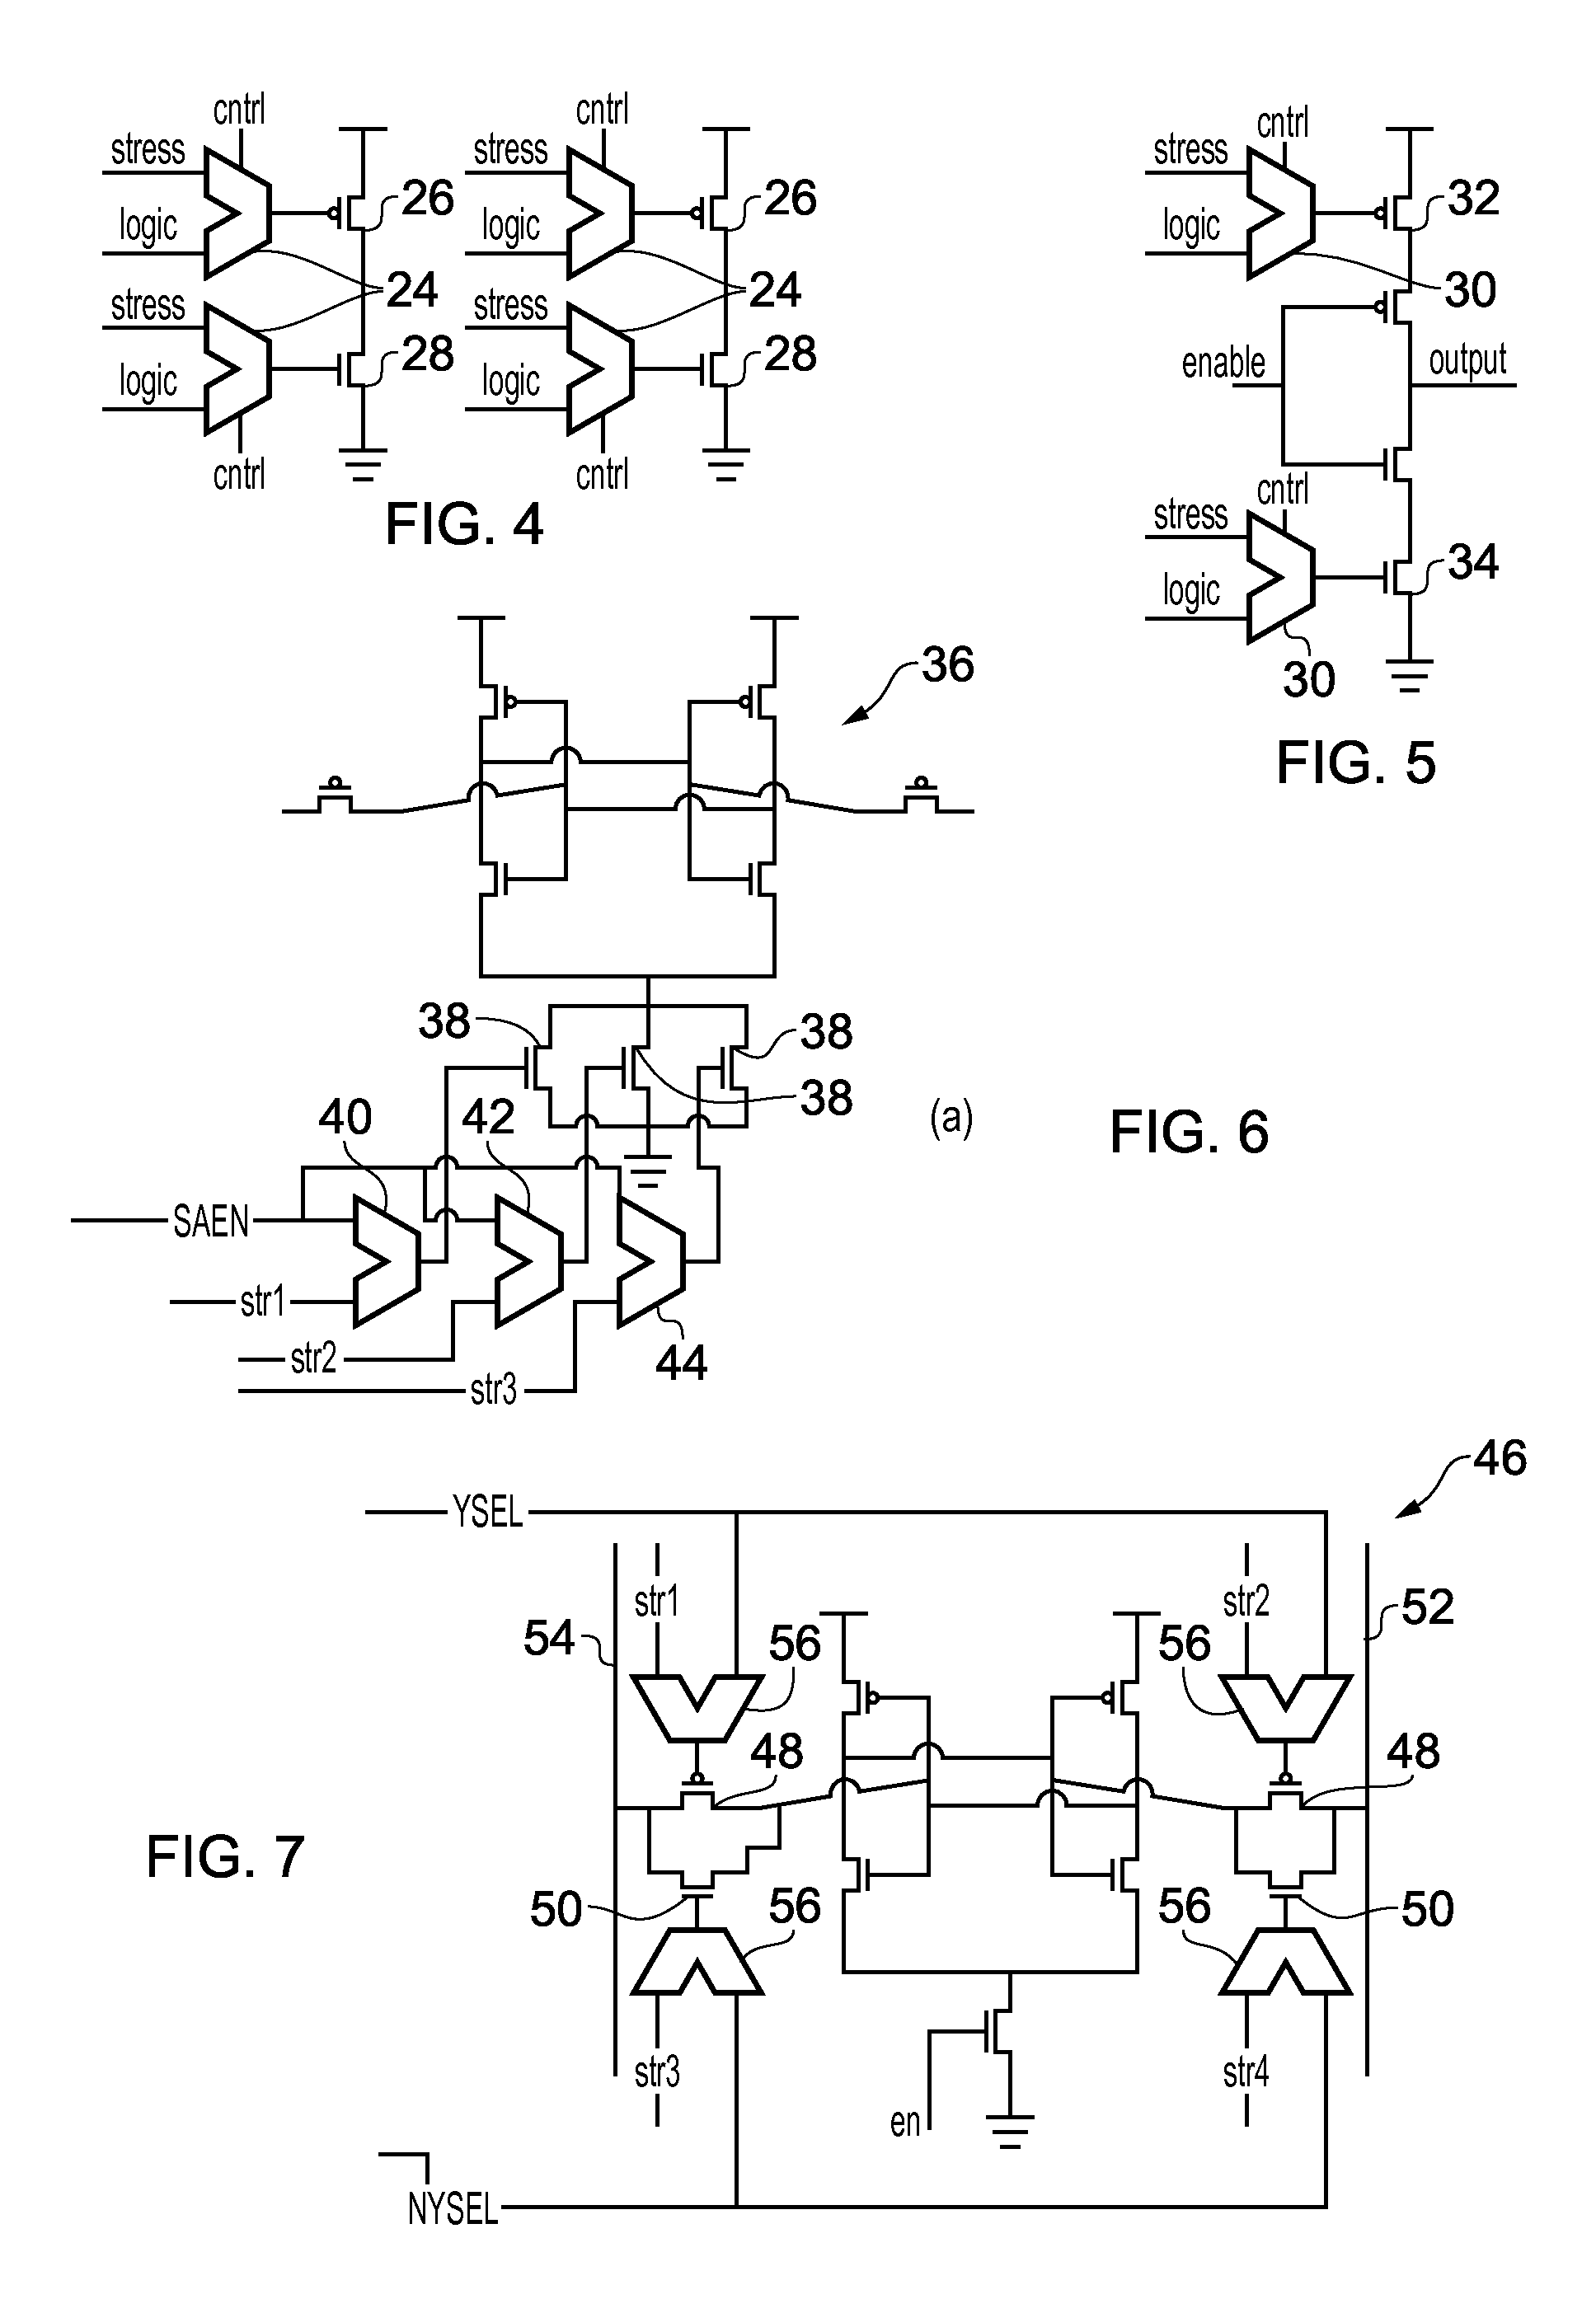 Post fabrication tuning of an integrated circuit